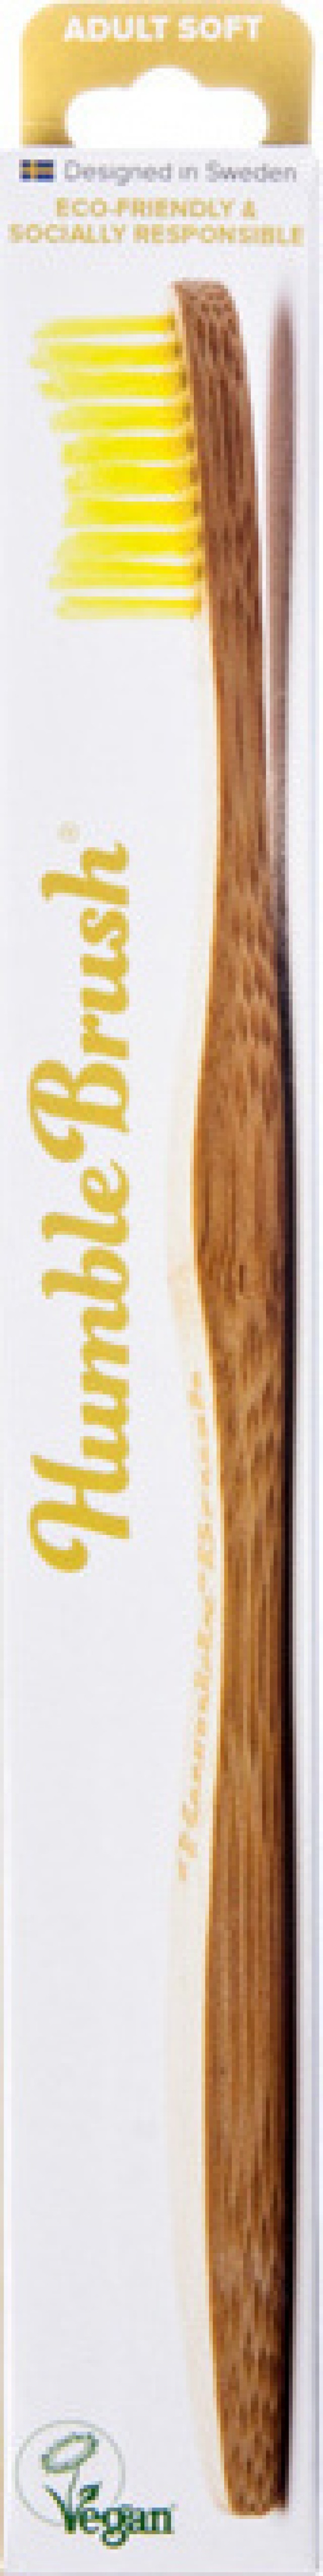 The Humble Co. Toothbrush Bamboo Yellow Κίτρινη Οδοντόβουρτσα Απο Μπαμπού Adult Soft 1 τμχ product photo